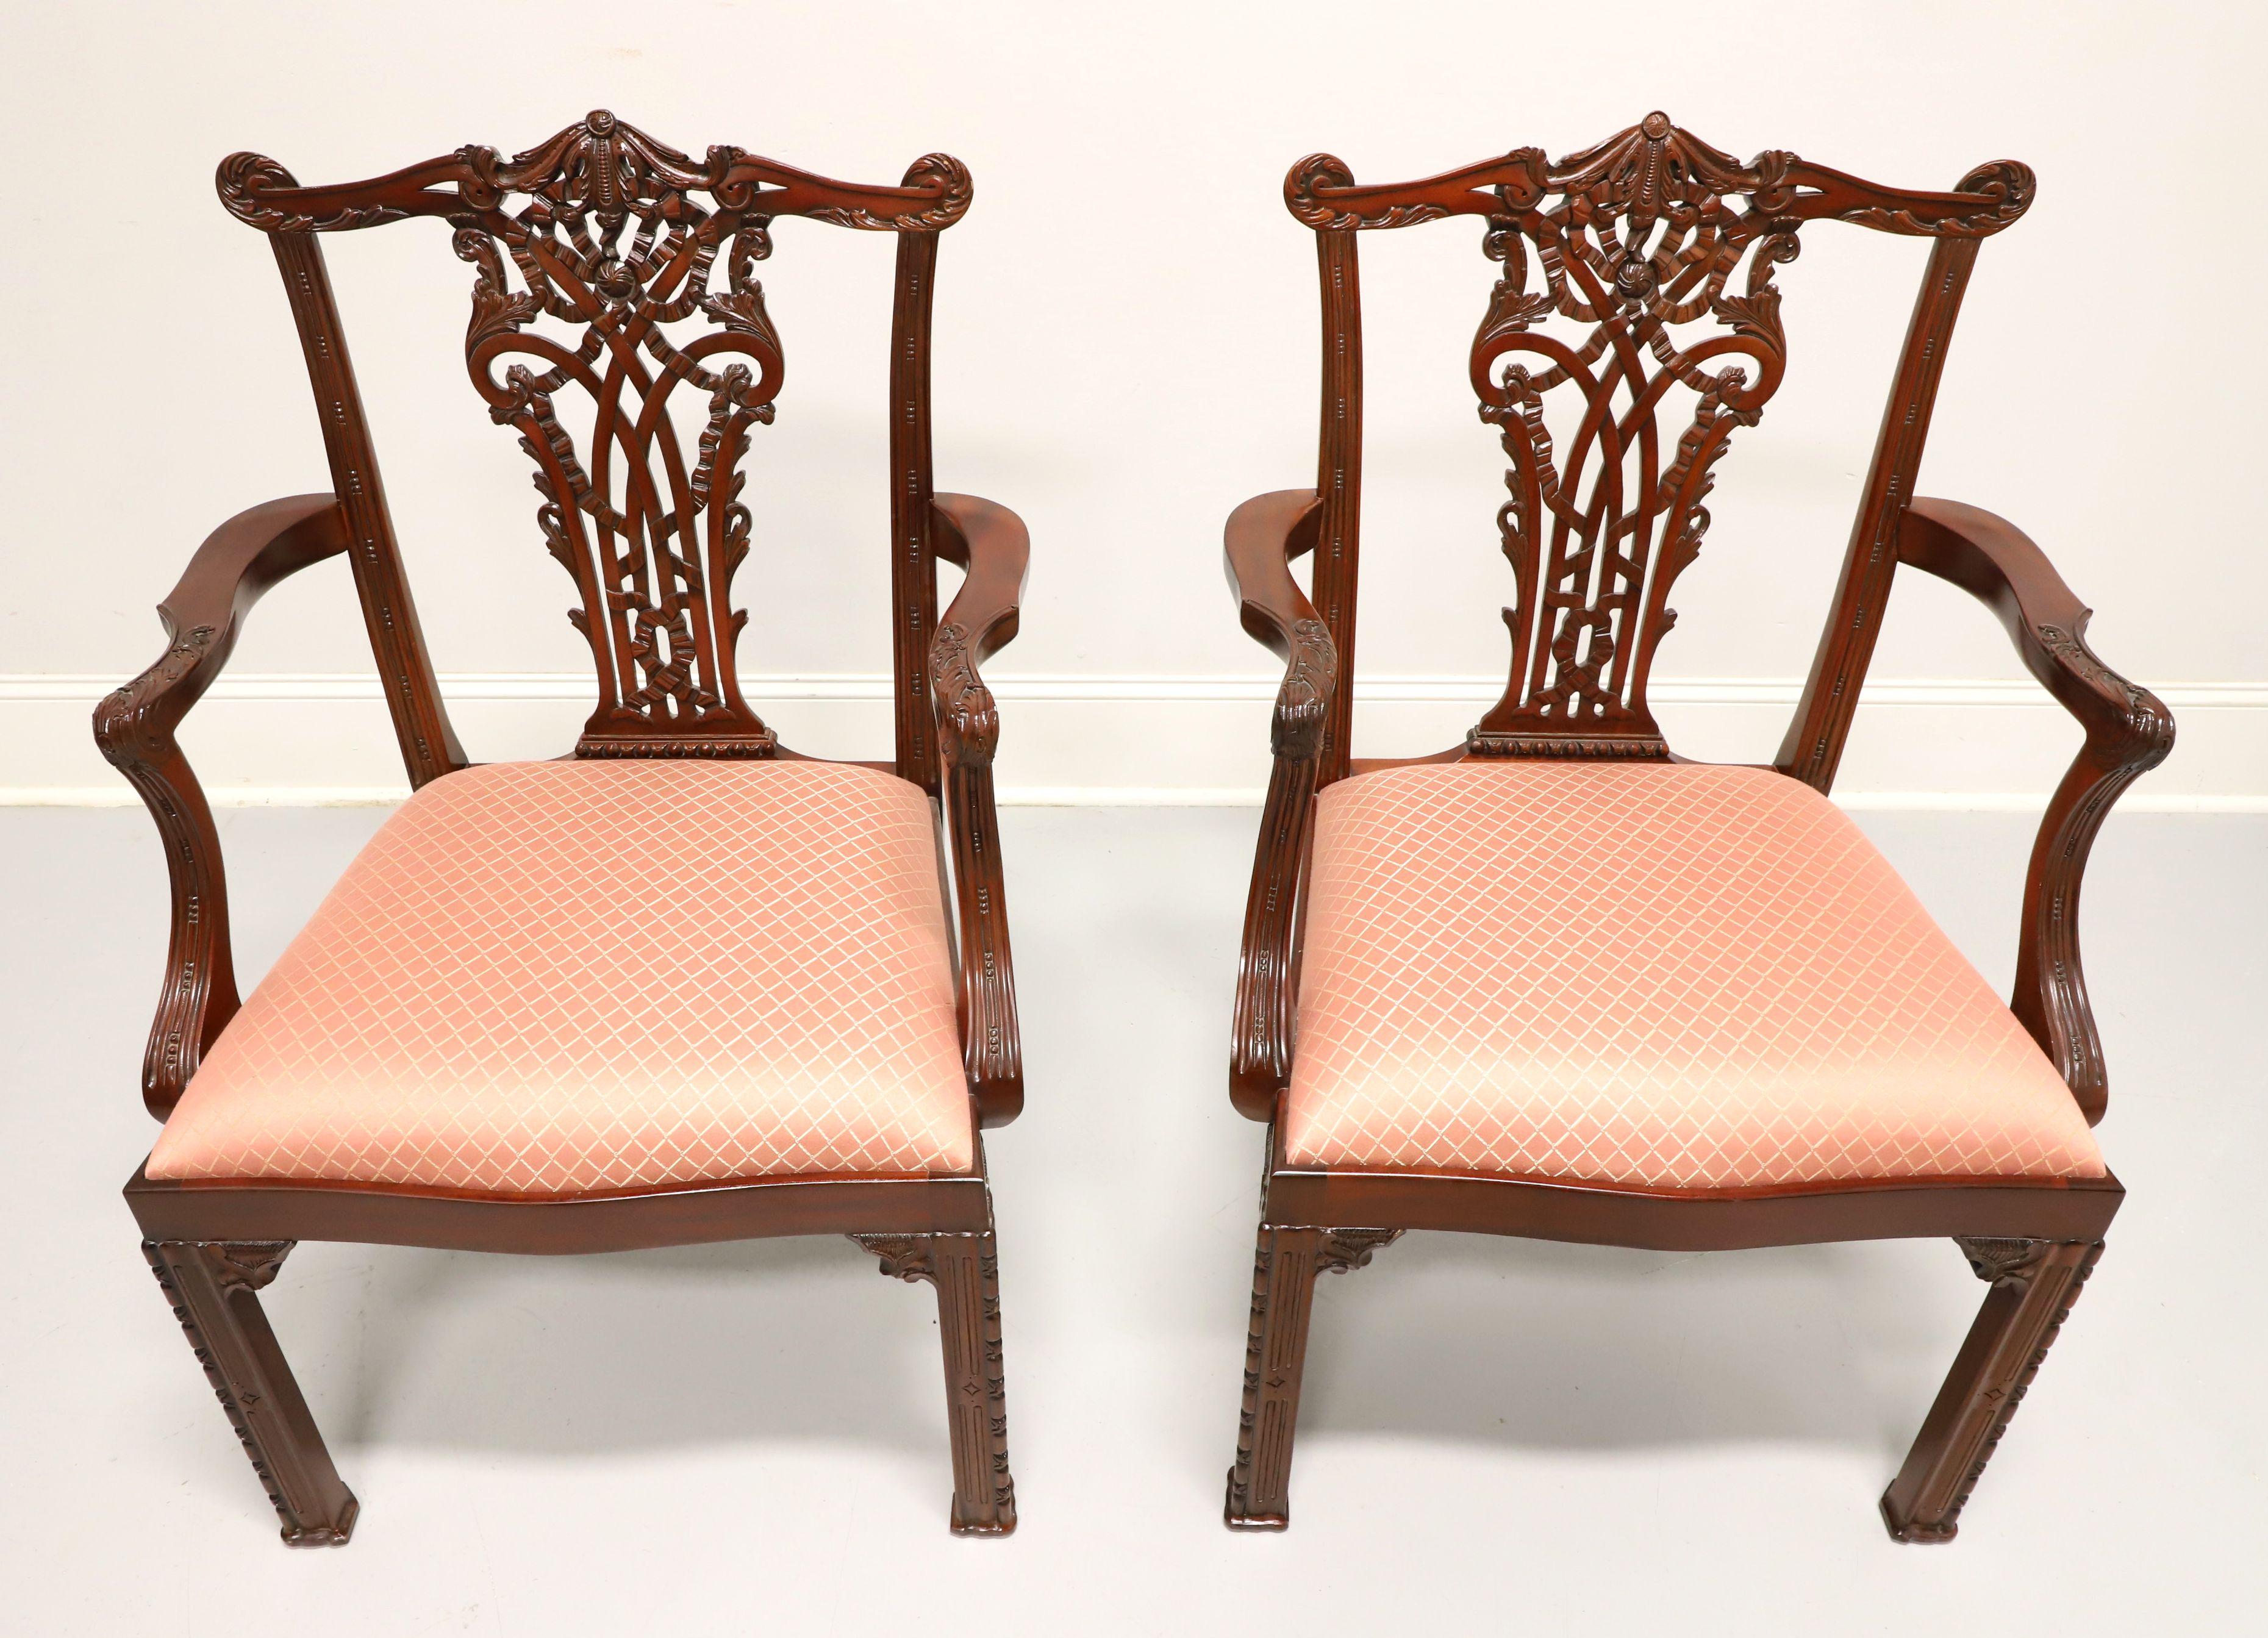 A pair of Chinese Chippendale style dining armchairs by Maitland Smith. Solid mahogany with carved crest rail, backrest, curved carved arms, and decorative fretwork details to straight front legs. Seats are upholstered in a salmon colored diamond